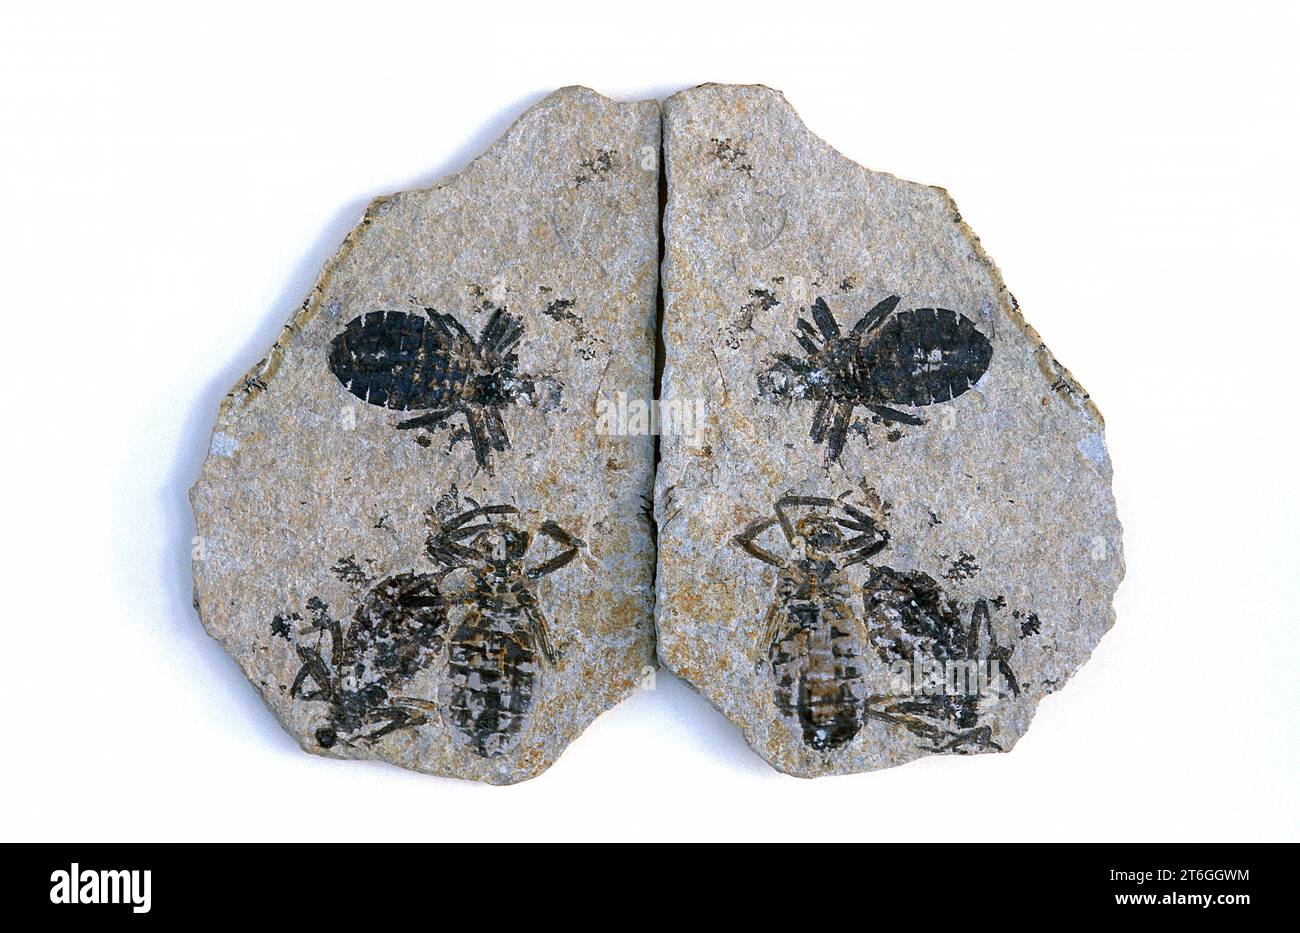 Dragonfly larvae fossil (Libellula doris) from Eocene. This sample comes from Italy. Stock Photo